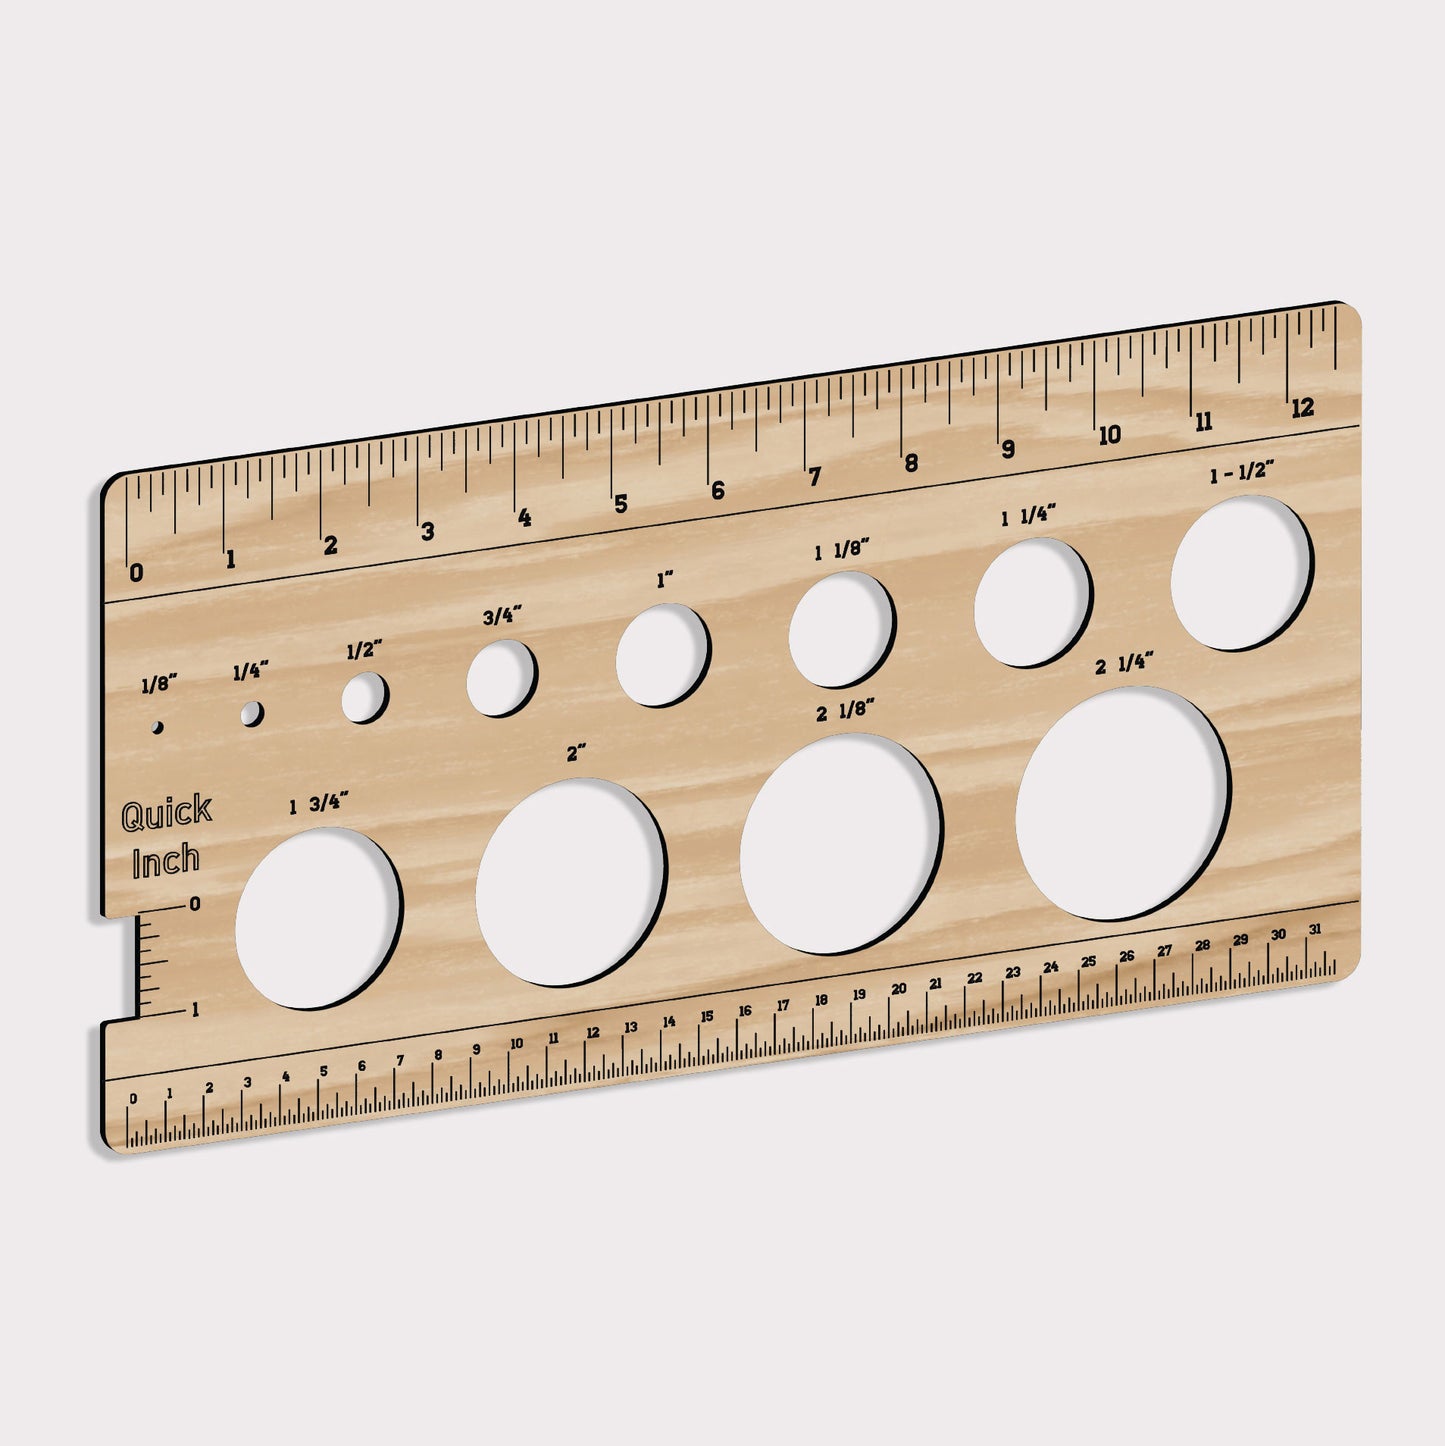 Back to School Ruler with Circles - Fun and Functional Measuring Tool for Students